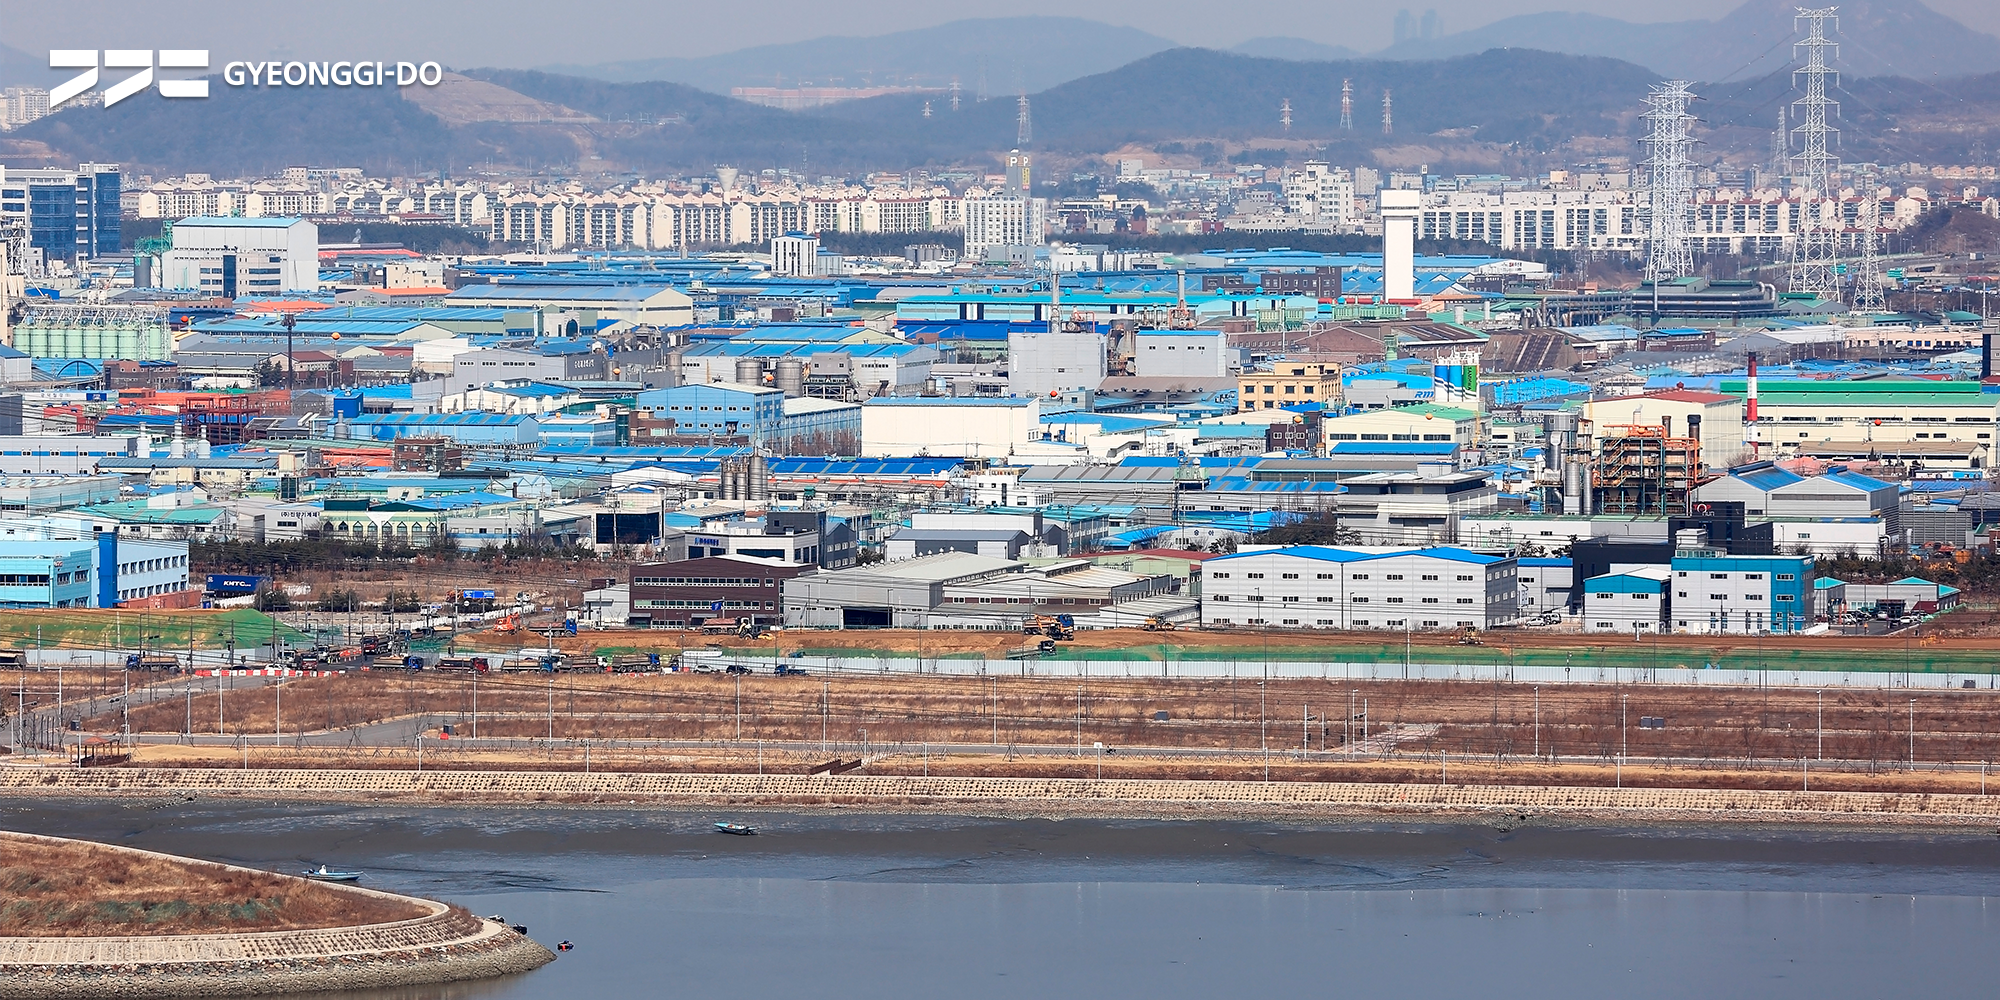 Siheung Smart Hub: Korea's top 3 industrial complexes for small and medium-sized enterprises